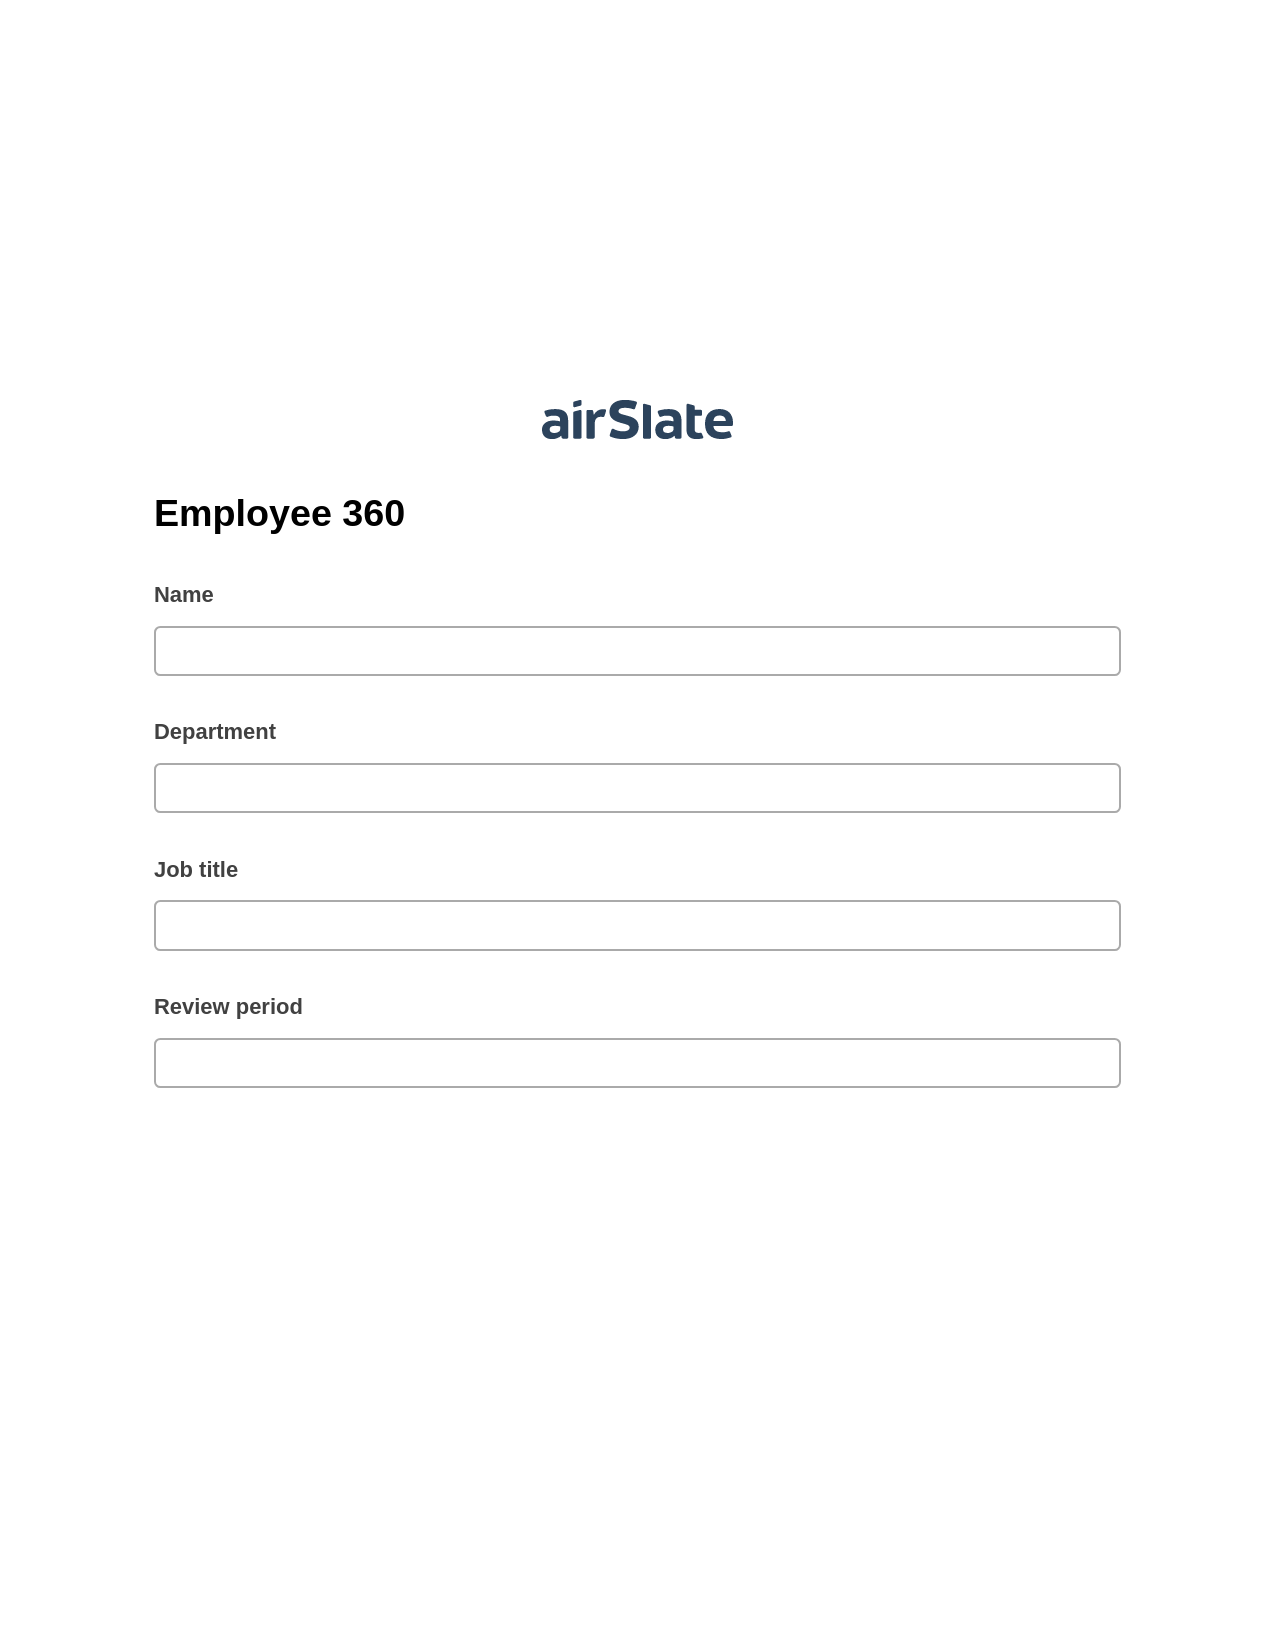 Employee 360 Pre-fill from Salesforce Records Bot, Email Notification Bot, Export to Smartsheet